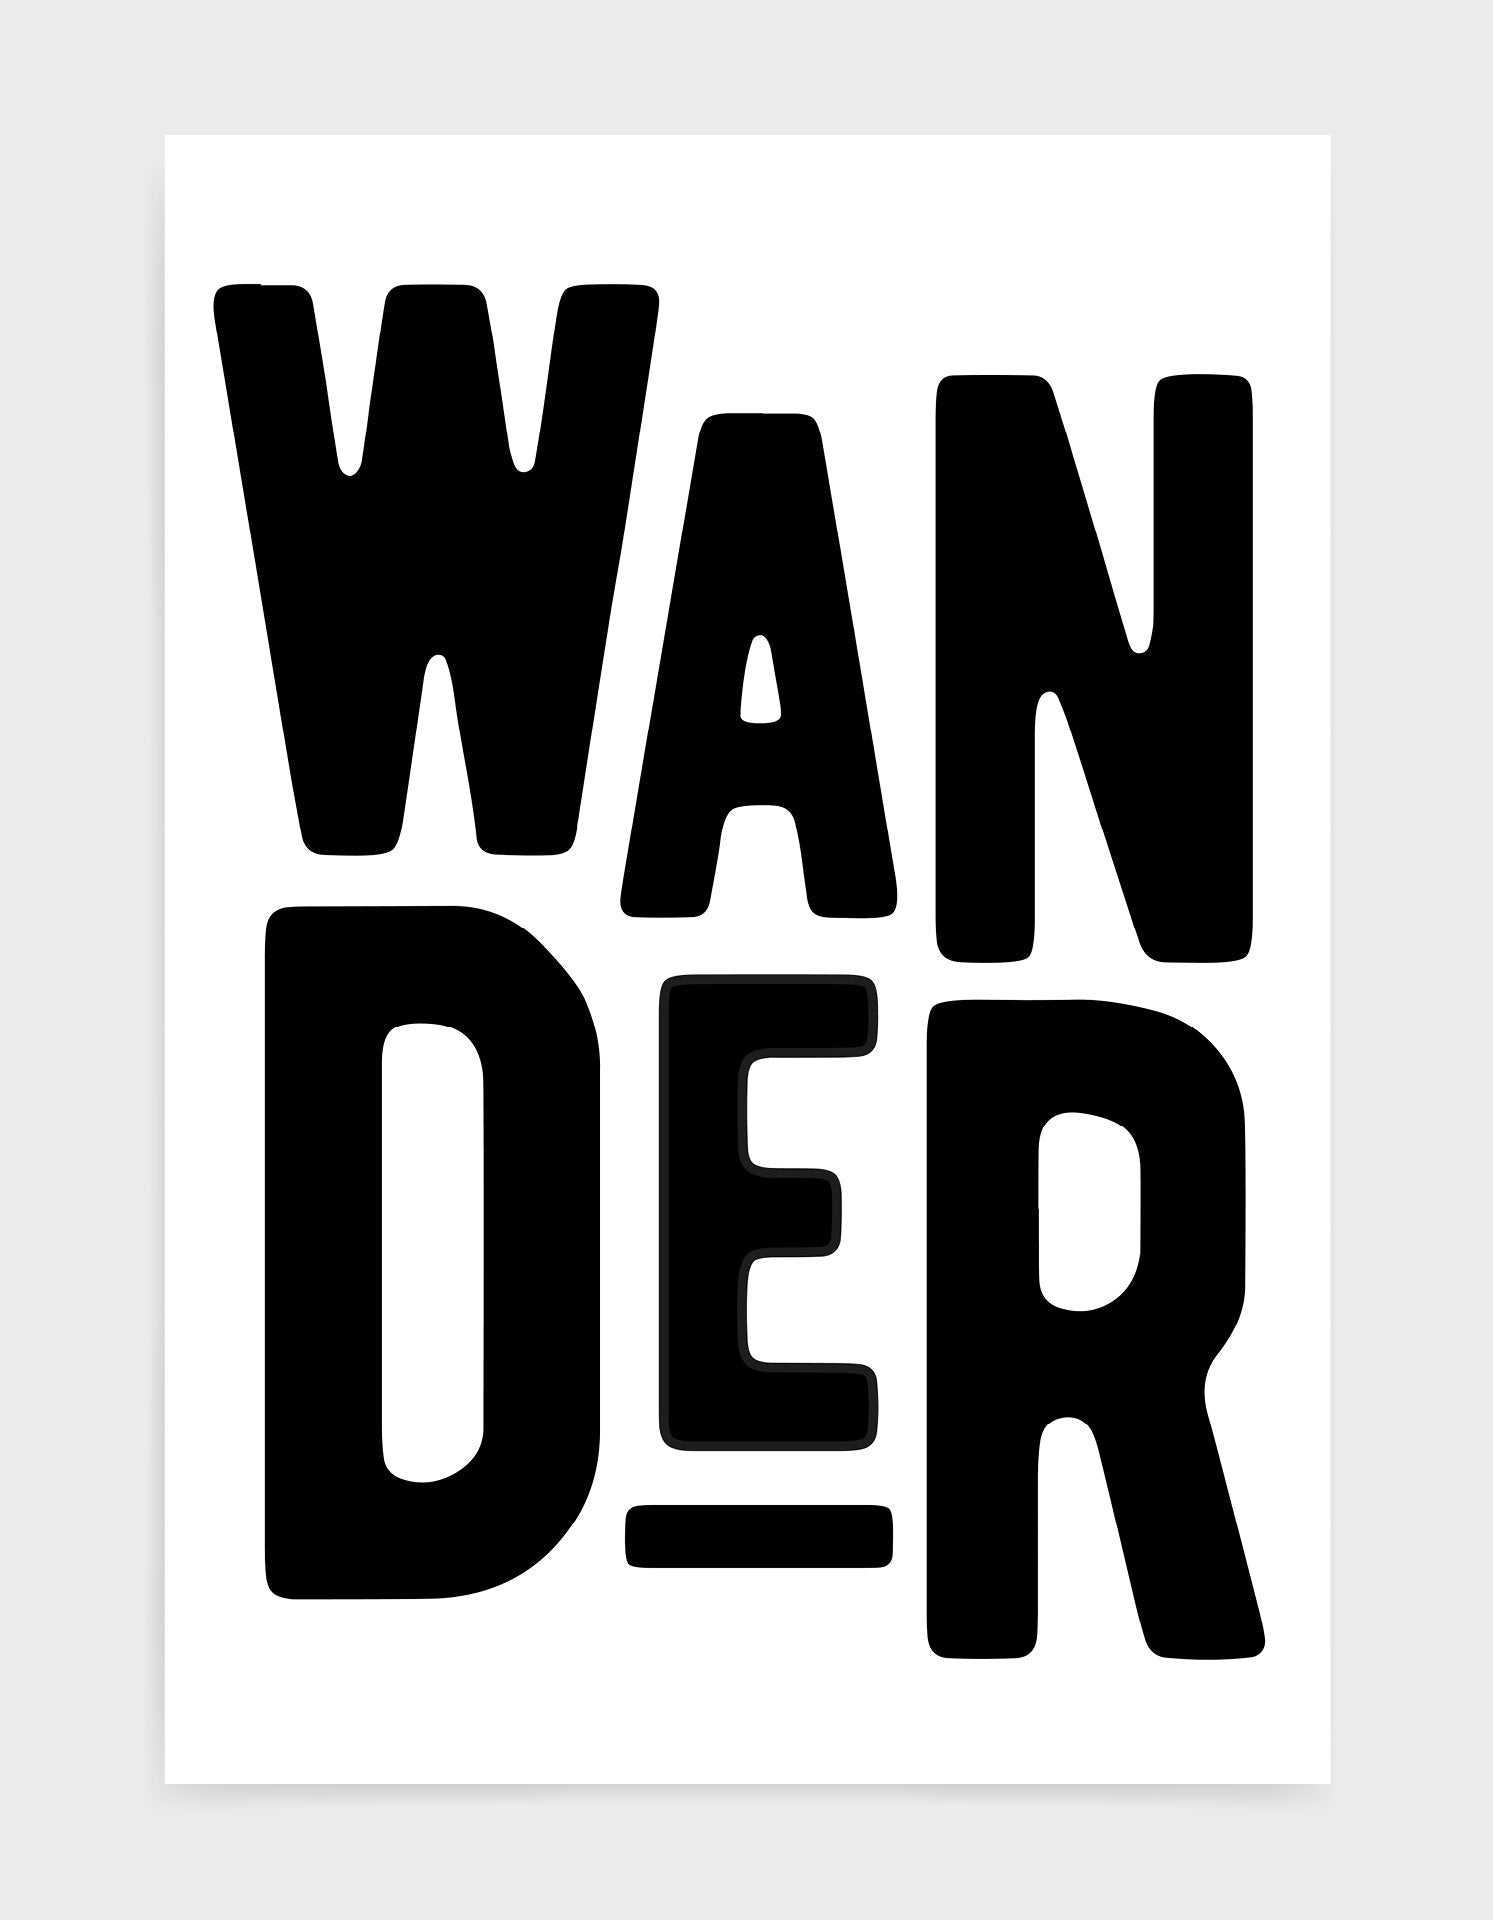 typography art print of the word wander in black text against a white background